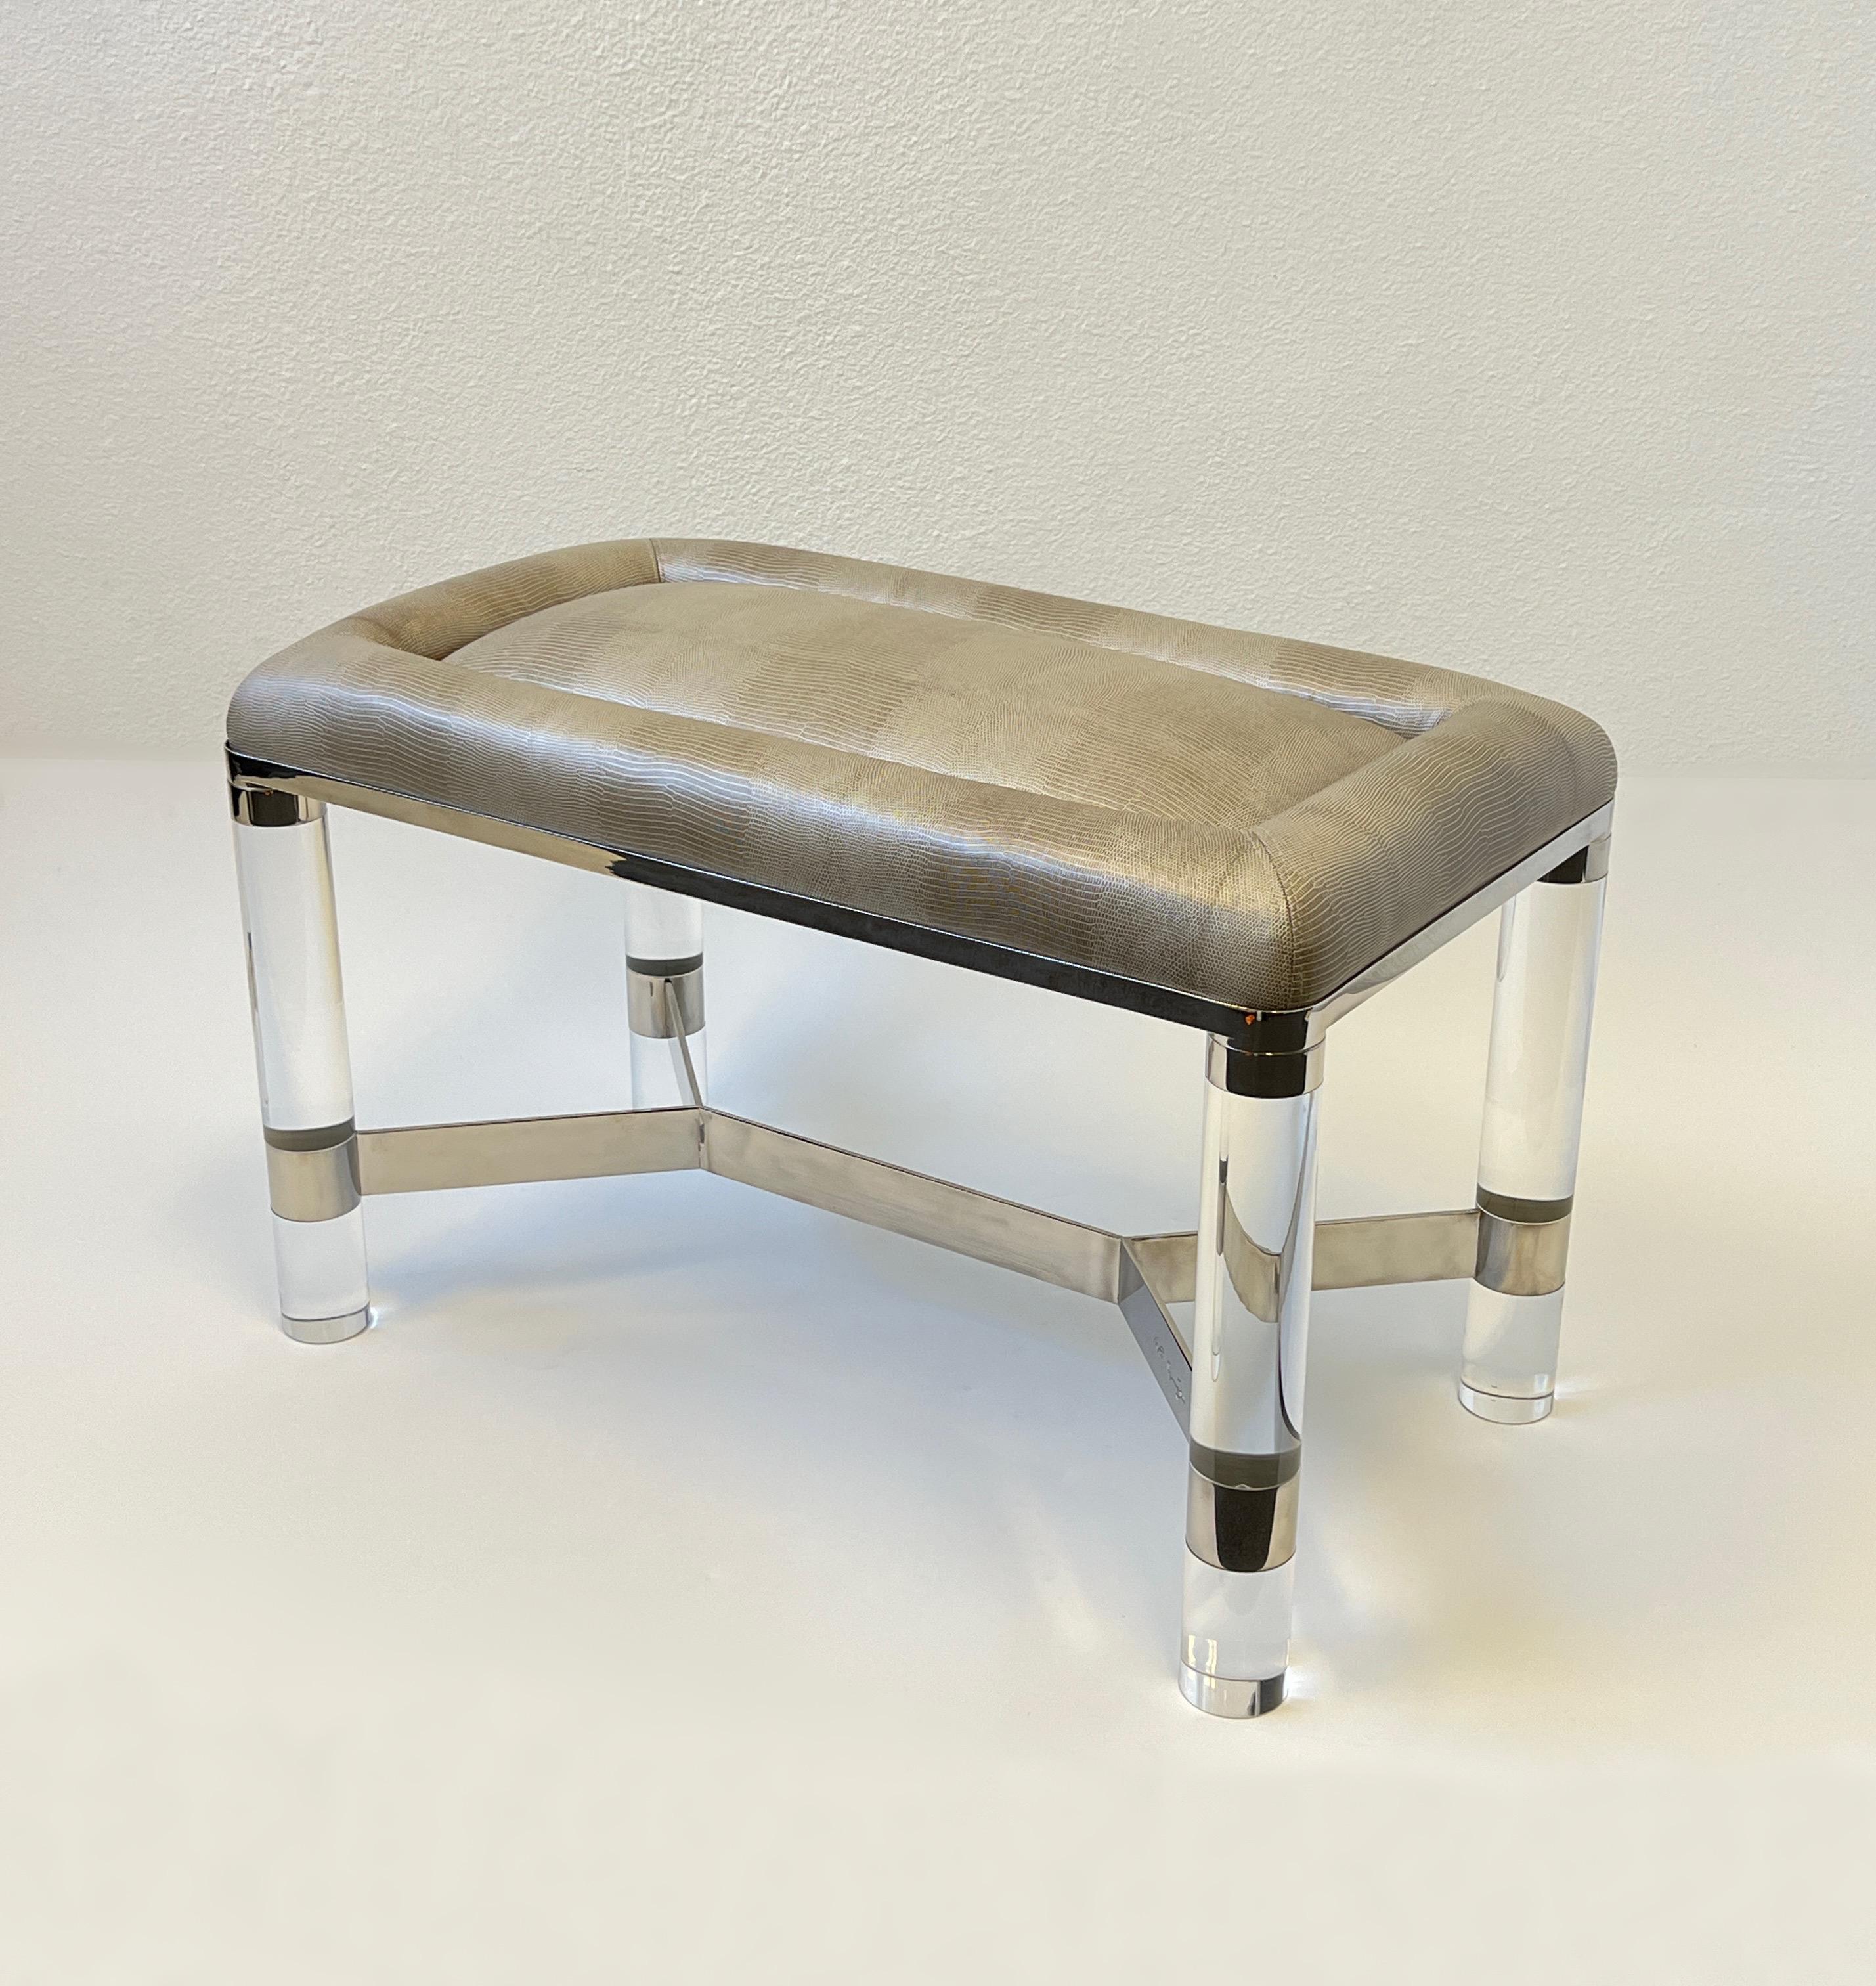 American Chrome and Lucite with Snakeskin Leather Bench by Karl Springer For Sale